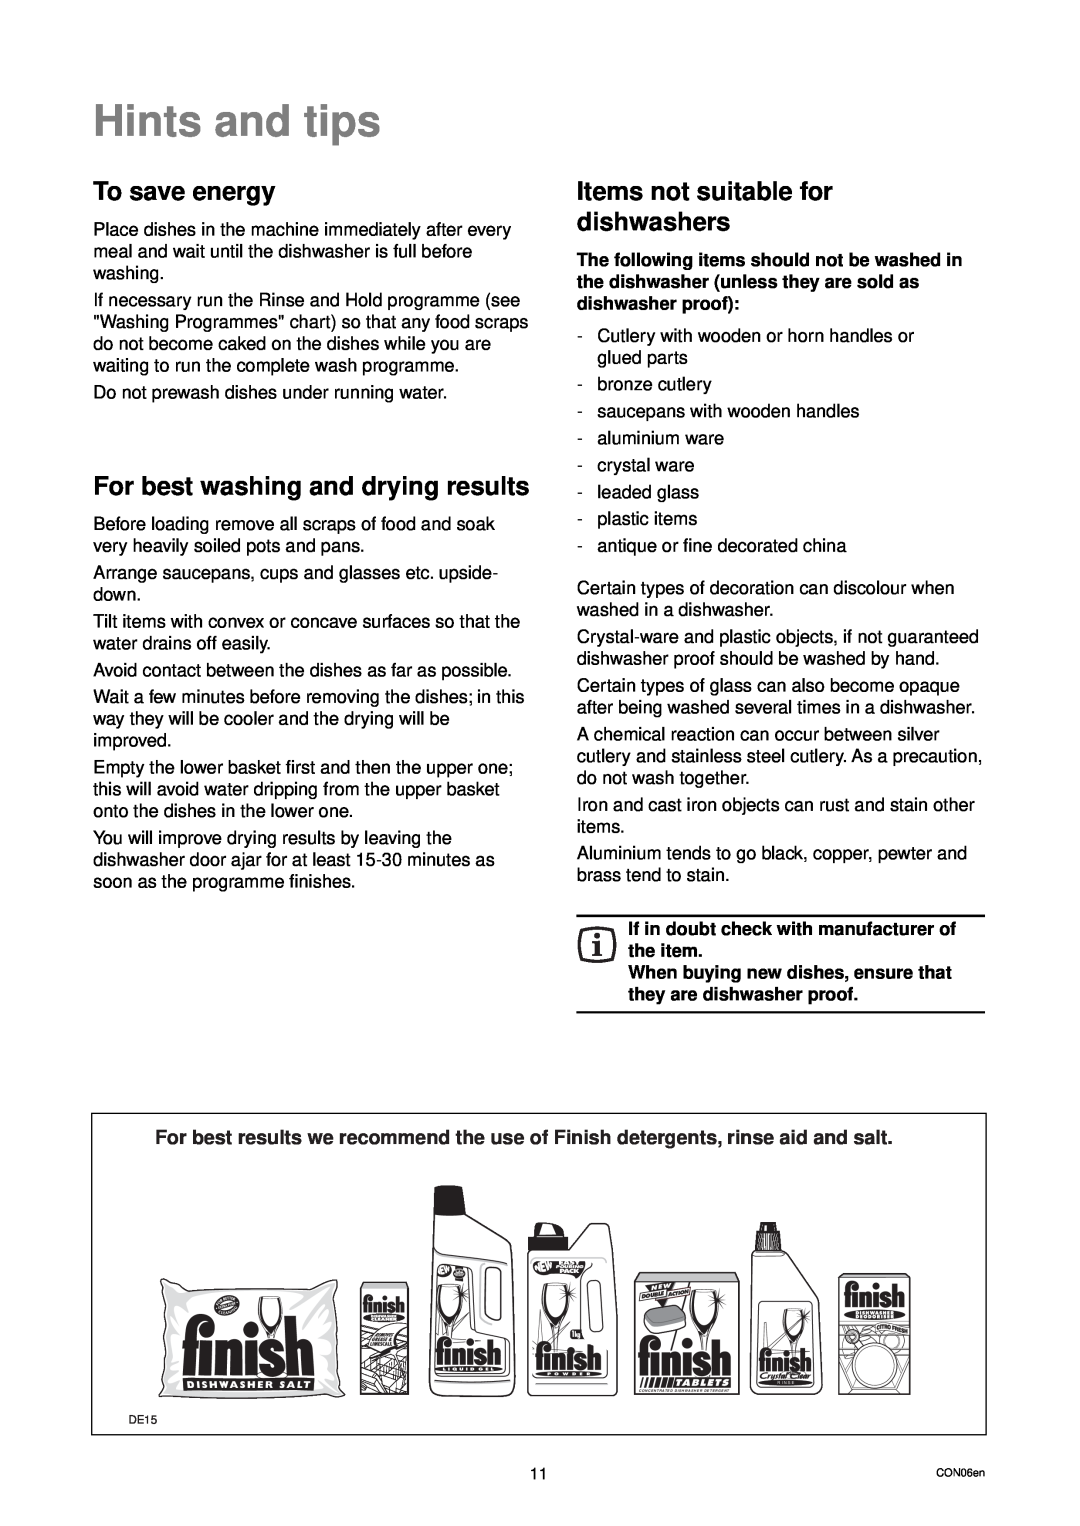 Zanussi DWS 949 Hints and tips, To save energy, For best washing and drying results, Items not suitable for dishwashers 